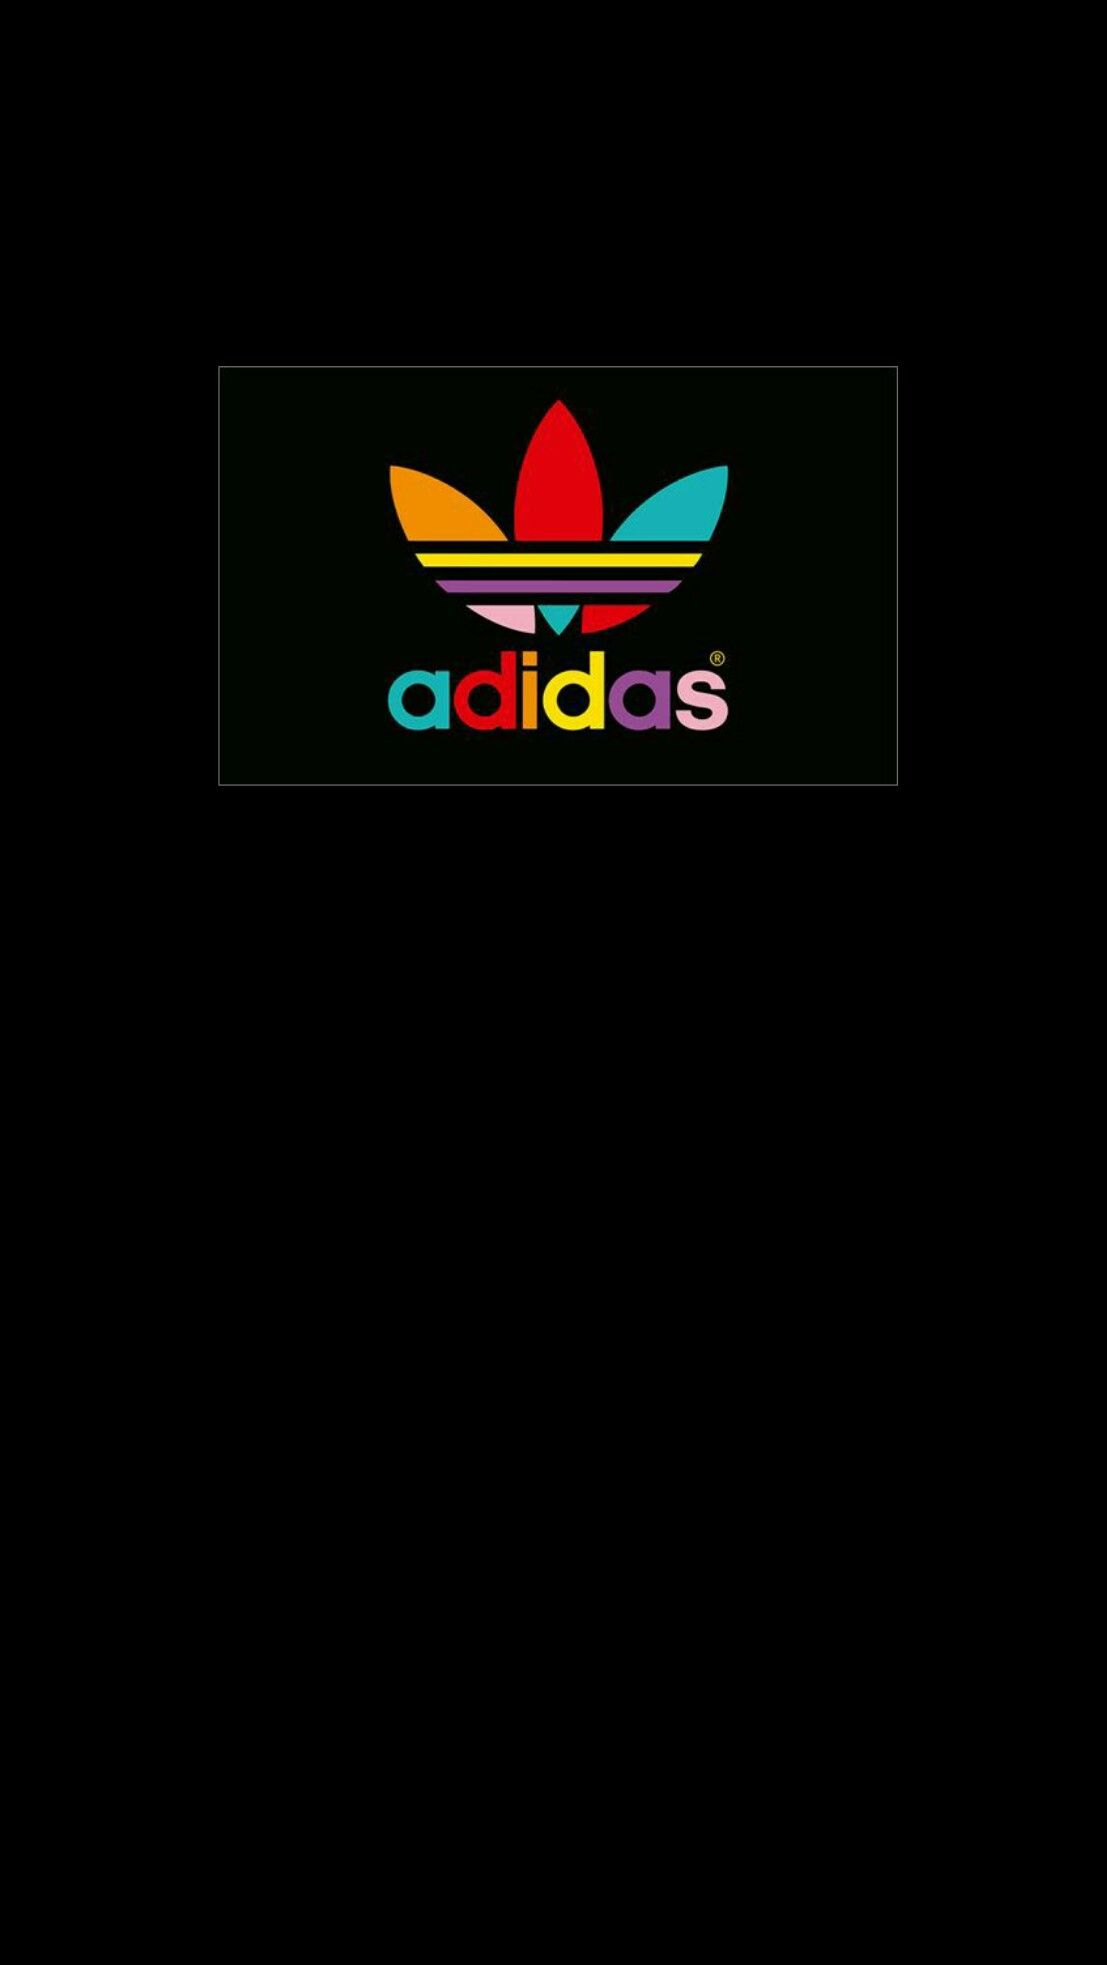 Red And Black Adidas Wallpapers Images Is Cool Wallpapers Adidas Originals 736x1306 Wallpaper Teahub Io